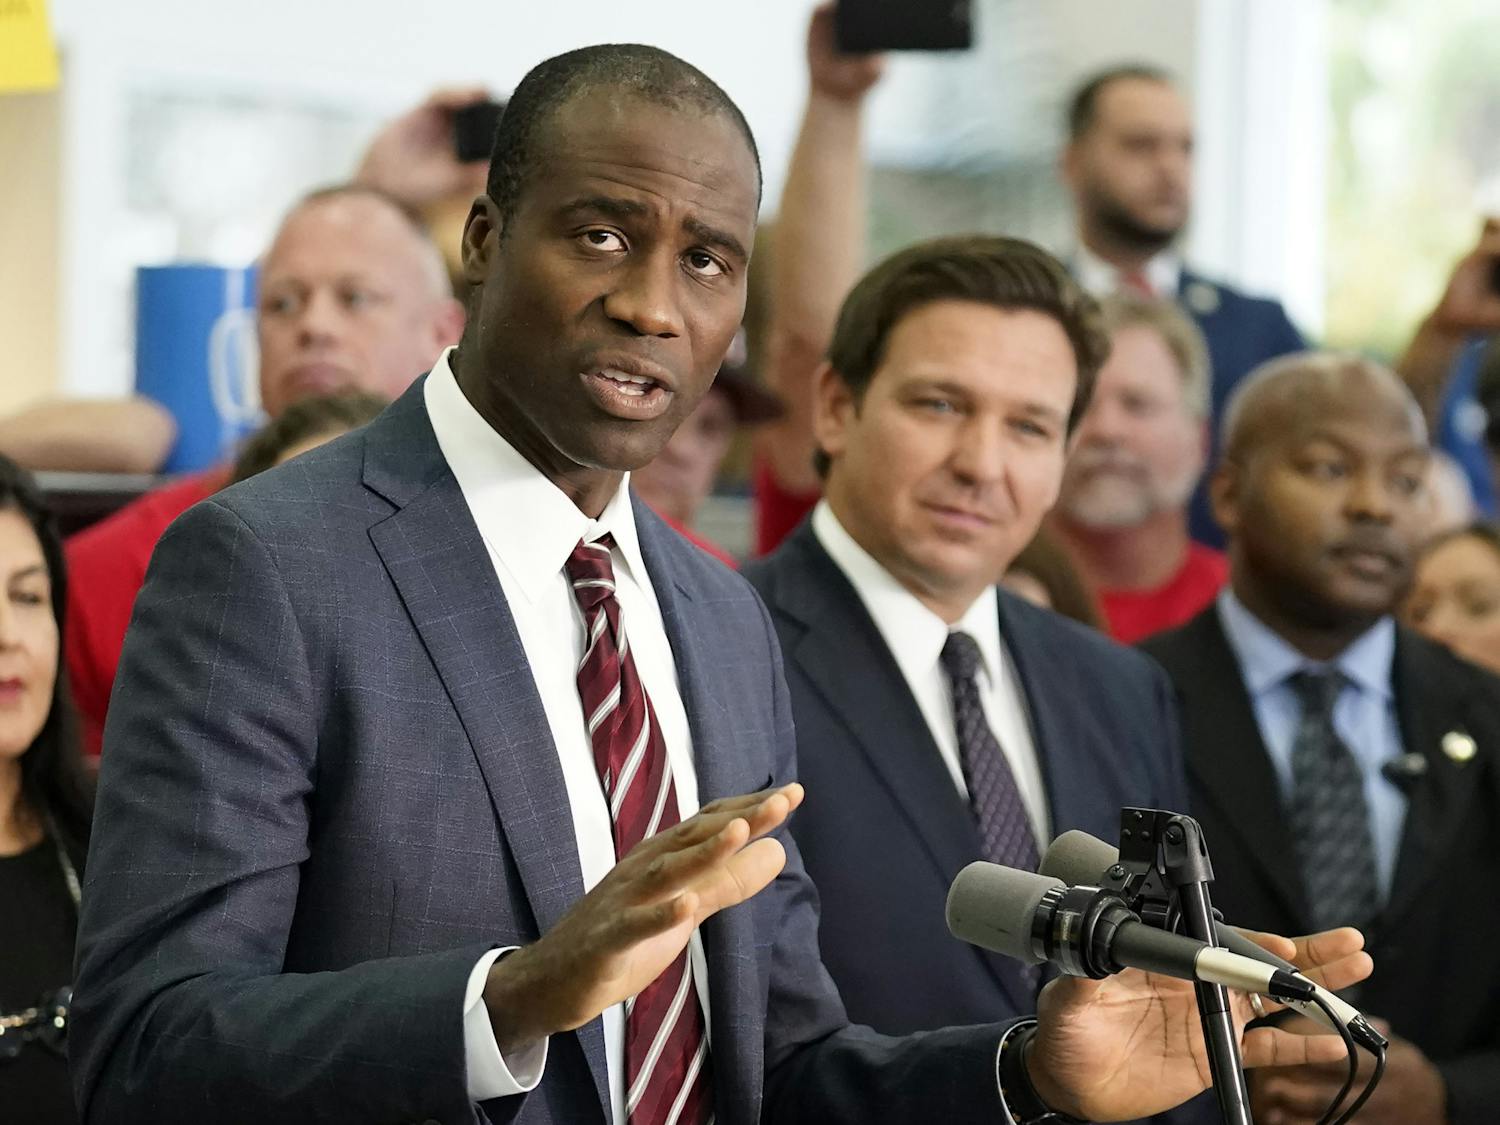 Florida Surgeon General Dr. Joseph Ladapo, front left, gestures as speaks to supporters and members of the media before a bill signing by Gov. Ron DeSantis, front right, Nov. 18, 2021, in Brandon, Fla. This week, Ladapo asked the state medical board to draft new policies that would likely restrict gender dysphoria treatments for transgender youth. (AP Photo/Chris O'Meara, File)